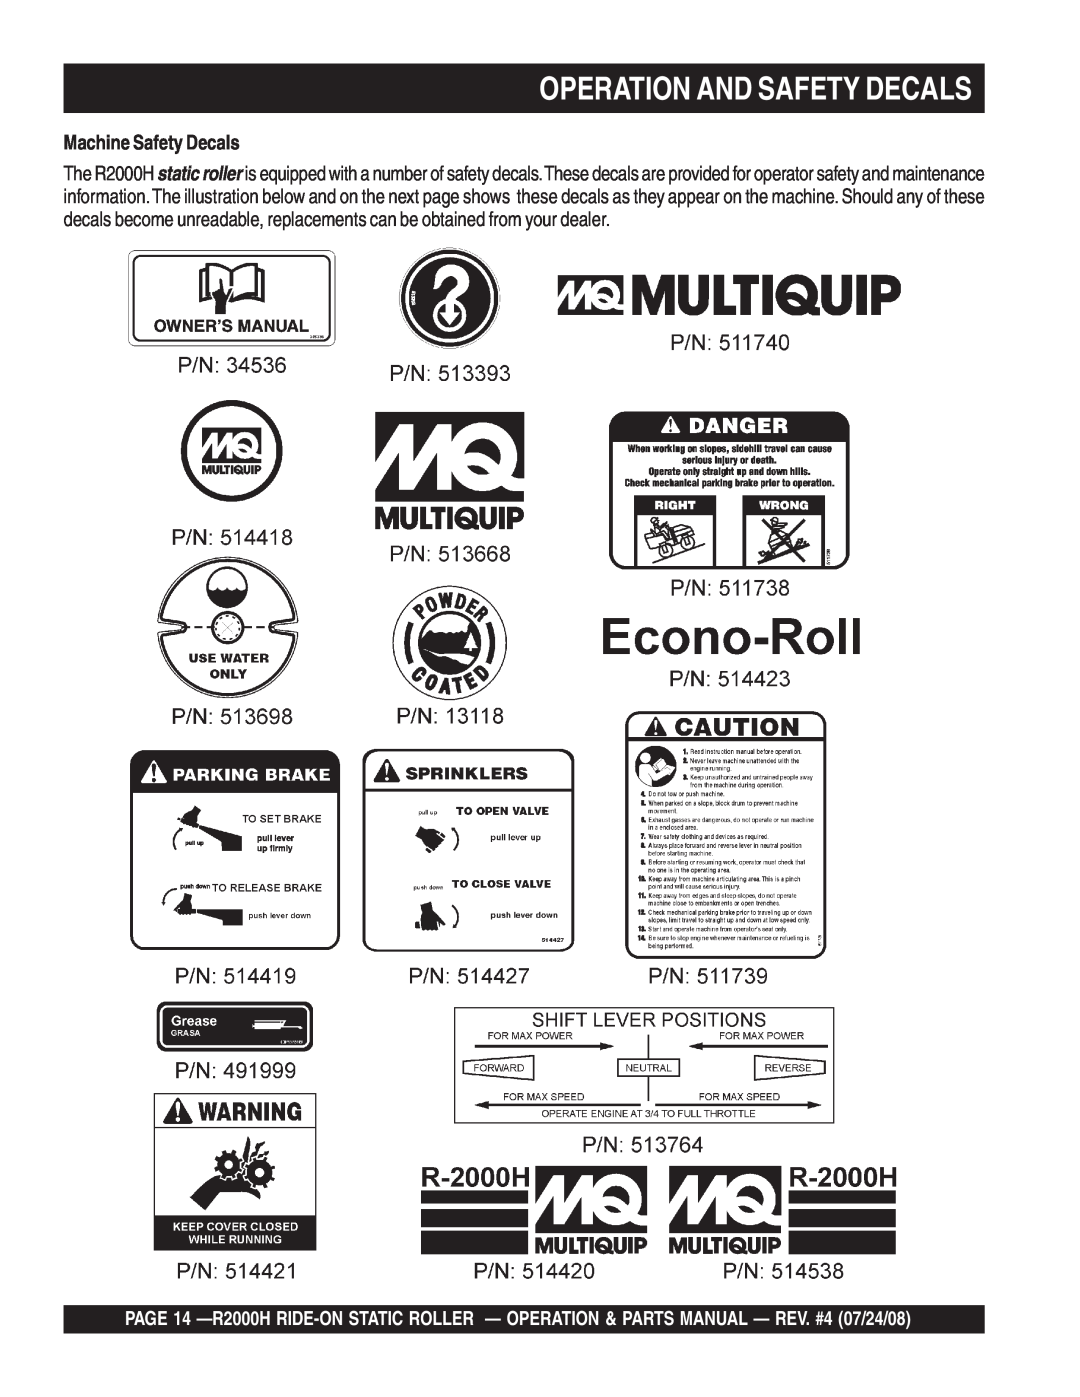 Multiquip R2000H manual Operation And Safety Decals, Machine Safety Decals 